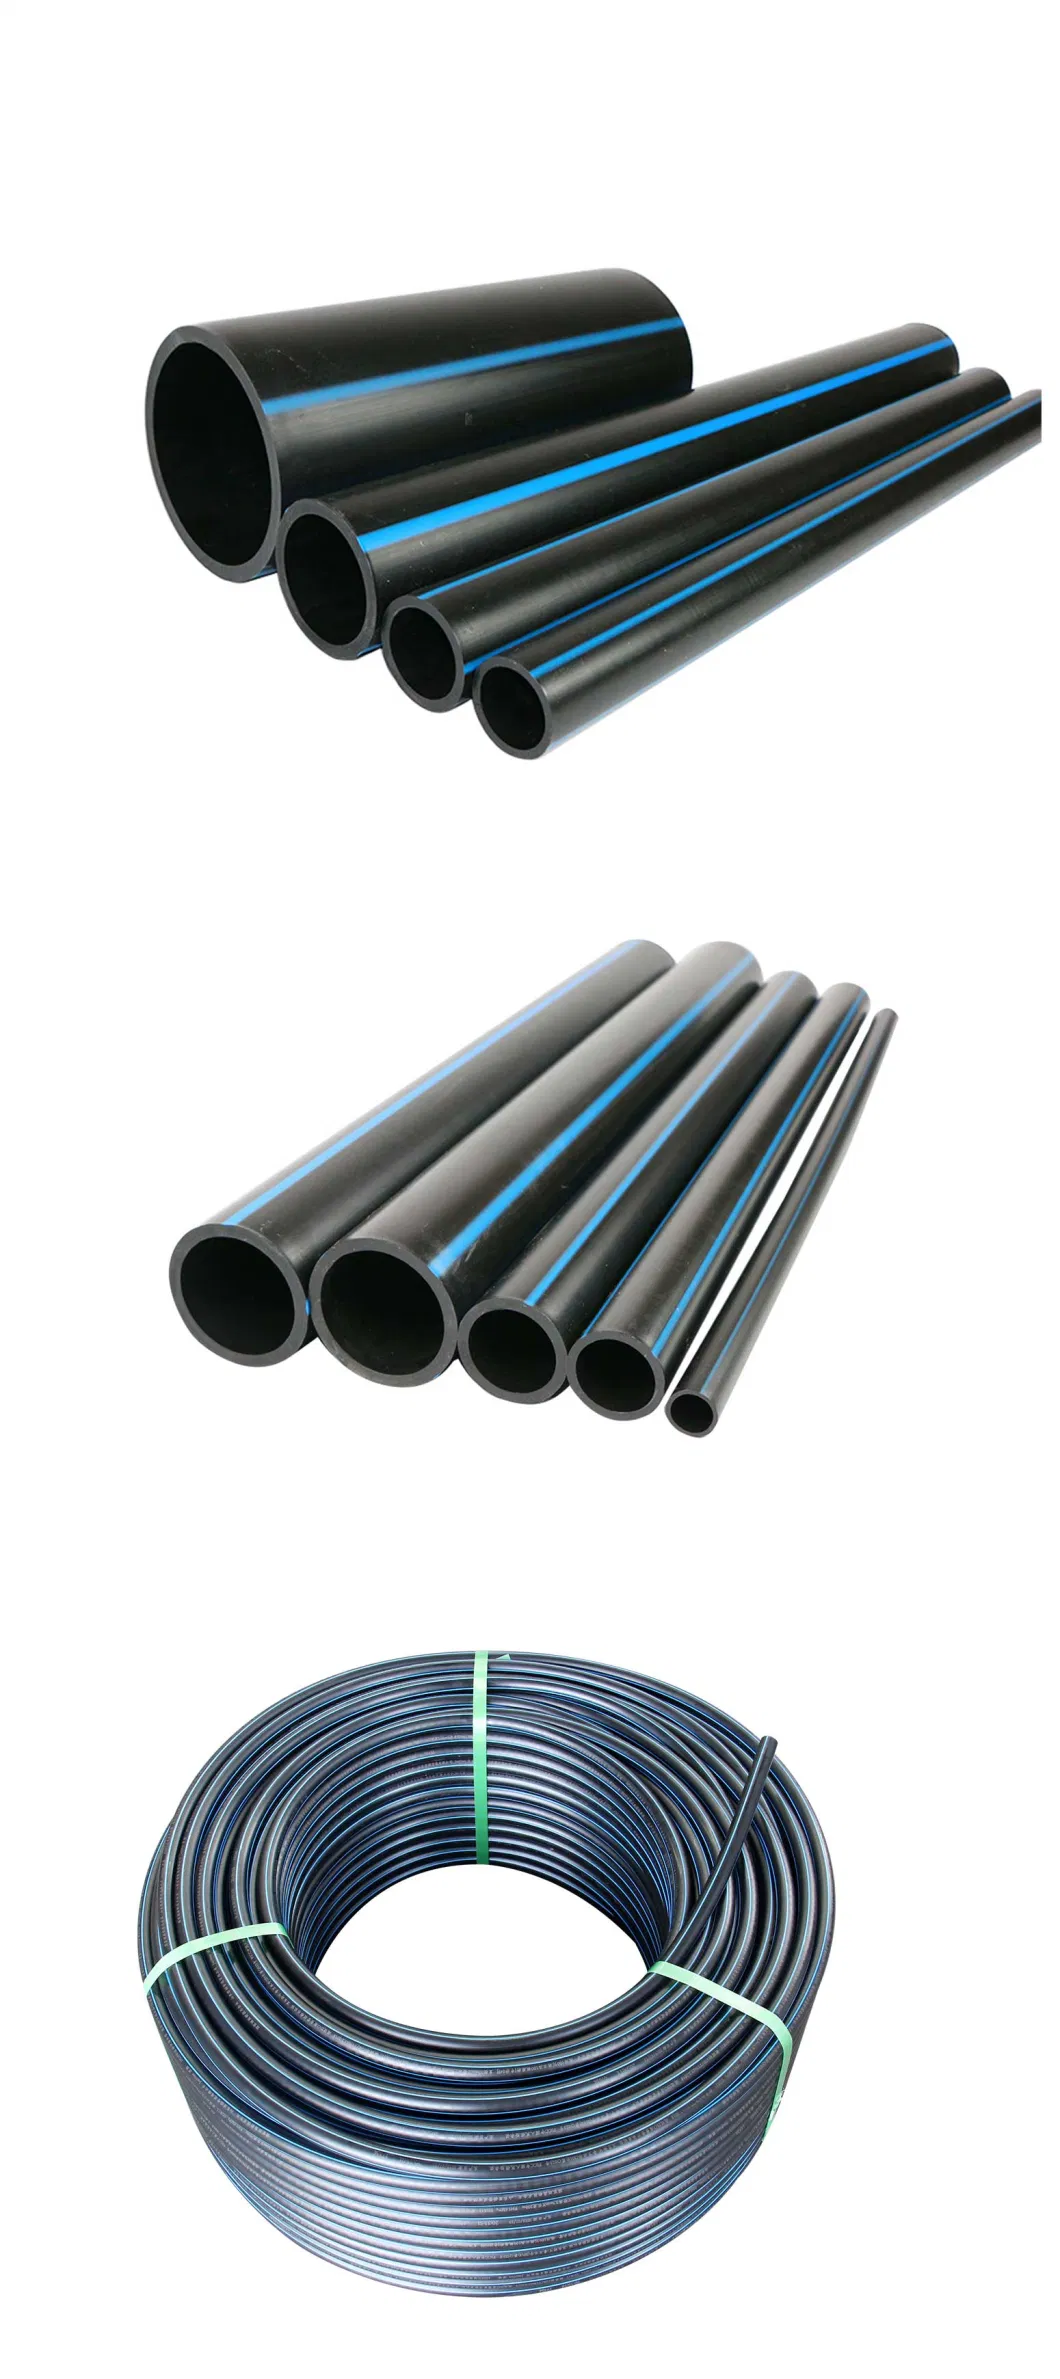 PE100 HDPE Pipe Polyethylene Pipes Pn6 SDR 26 21 17 13.6 11 DN200 110 mm Black HDPE Wate Pipe